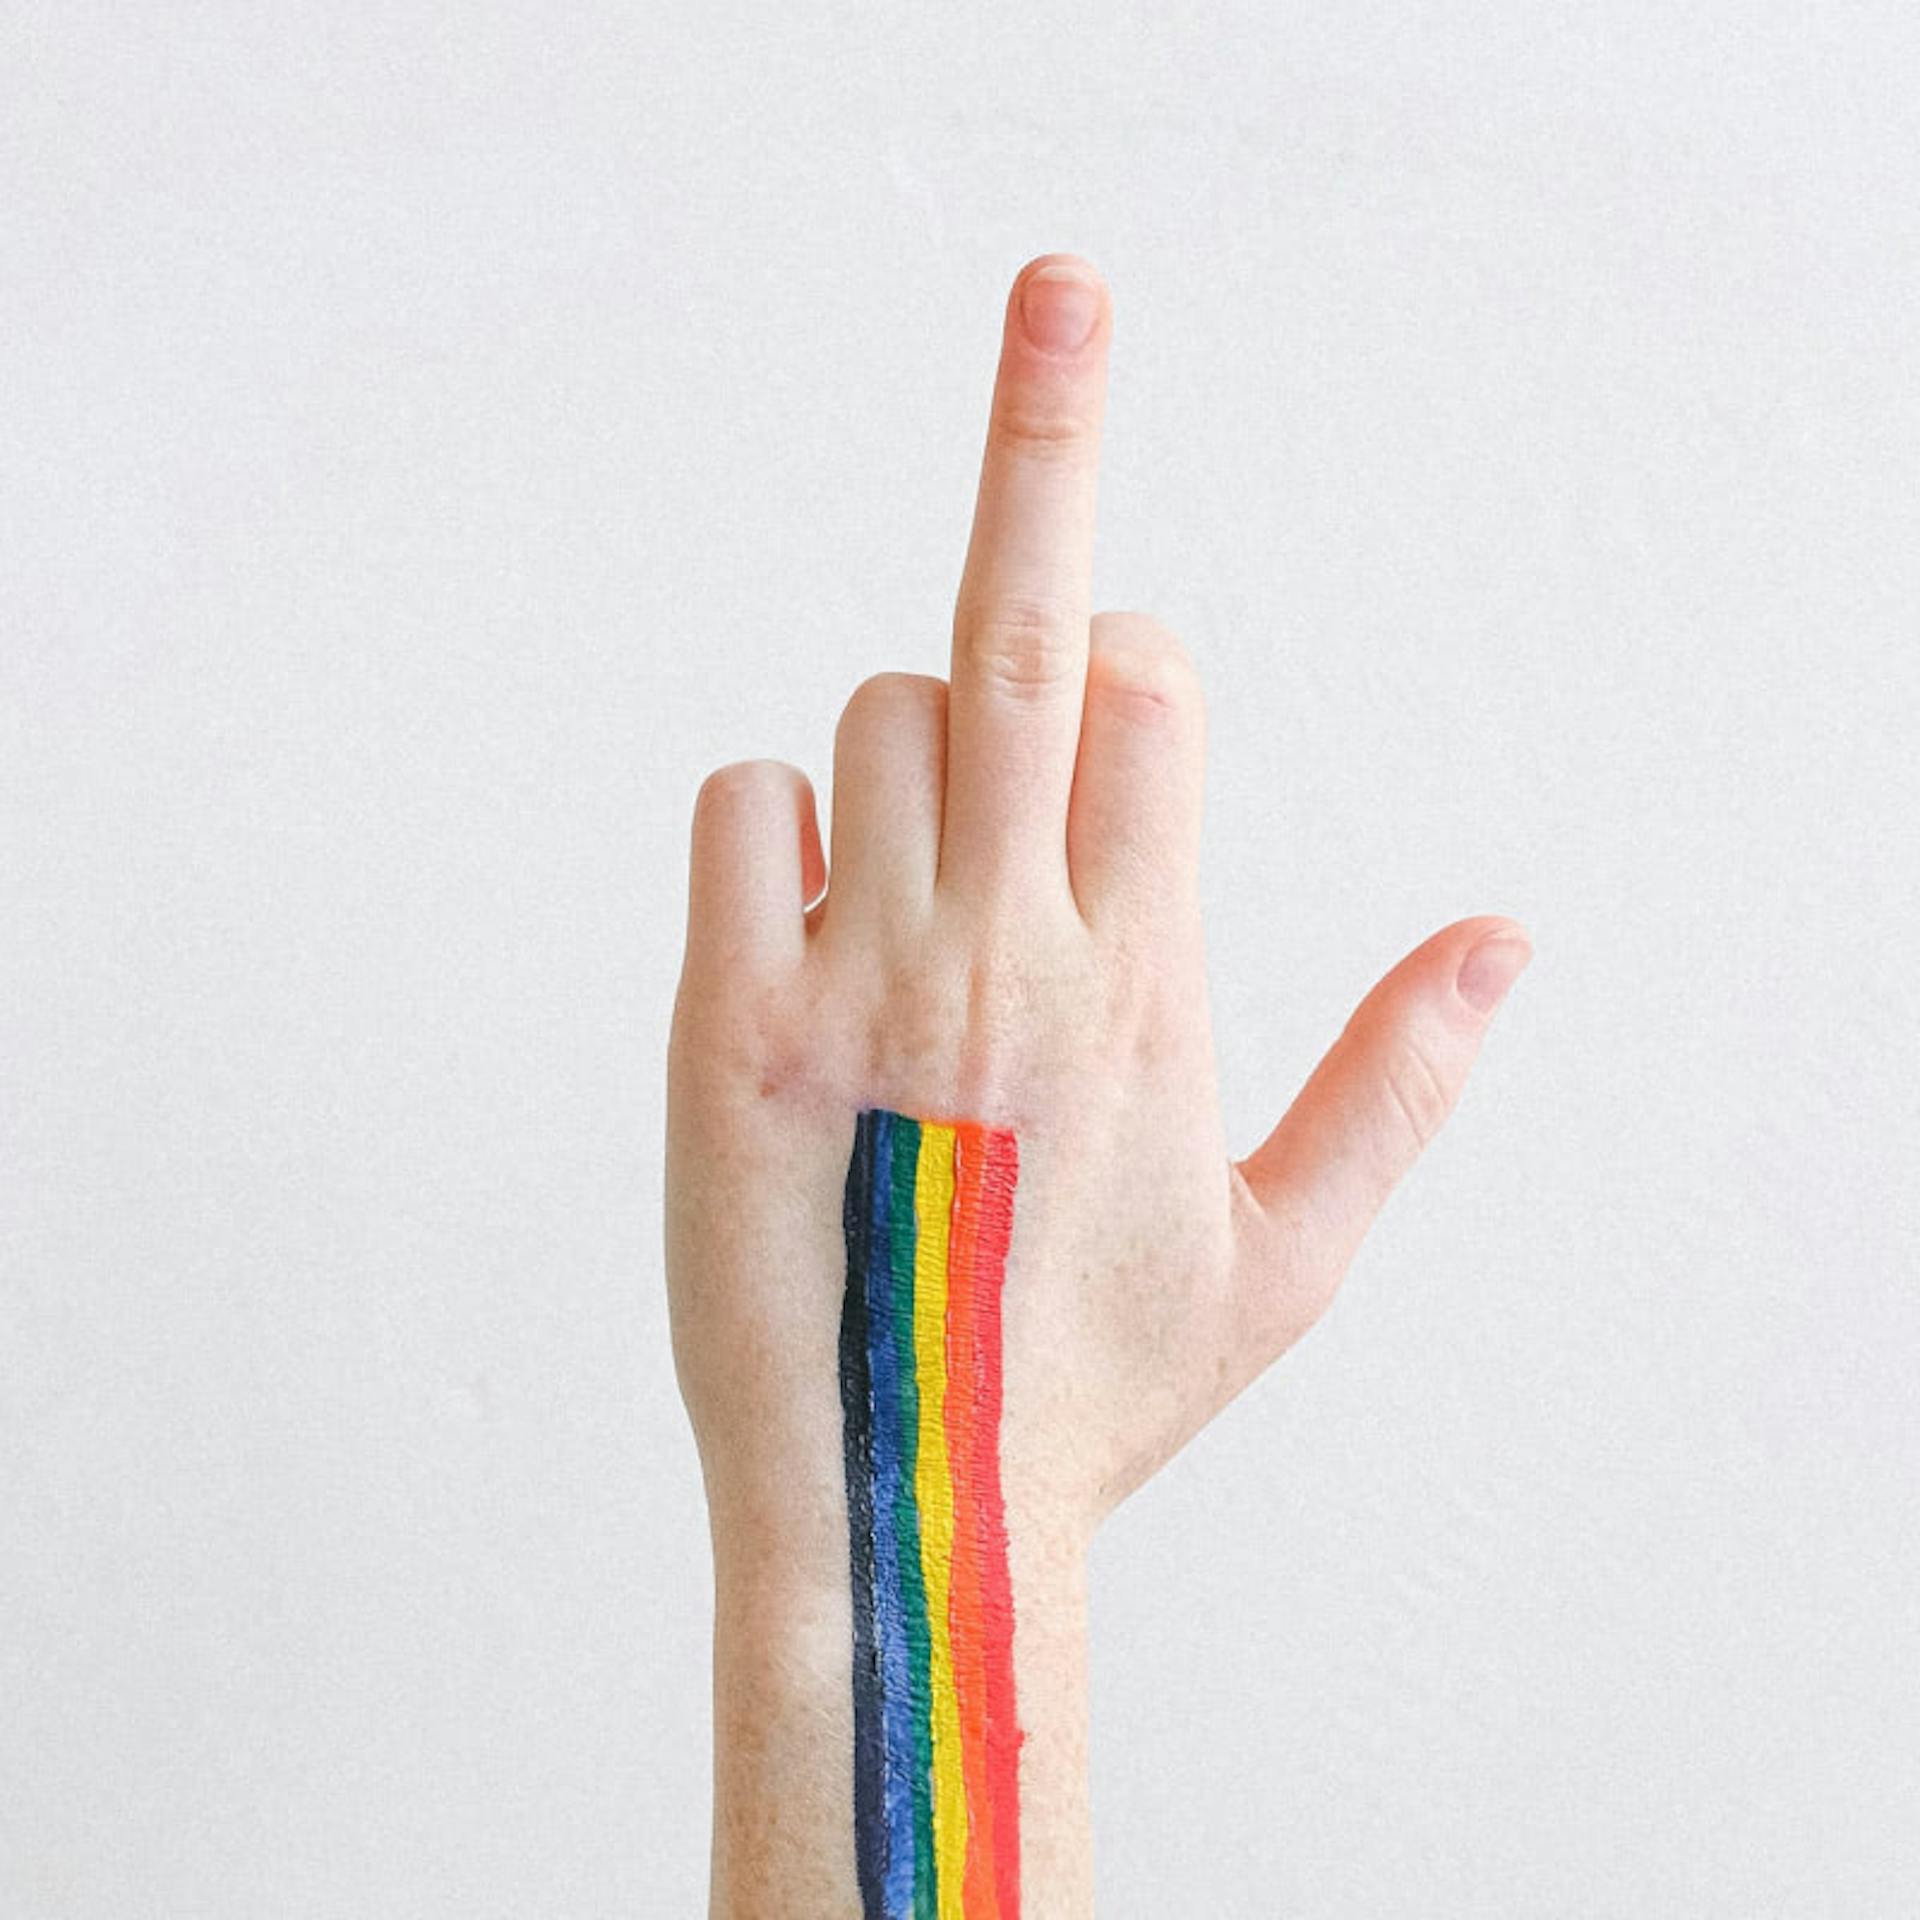 A raised middle finger with a rainbow flag painted on the hand.